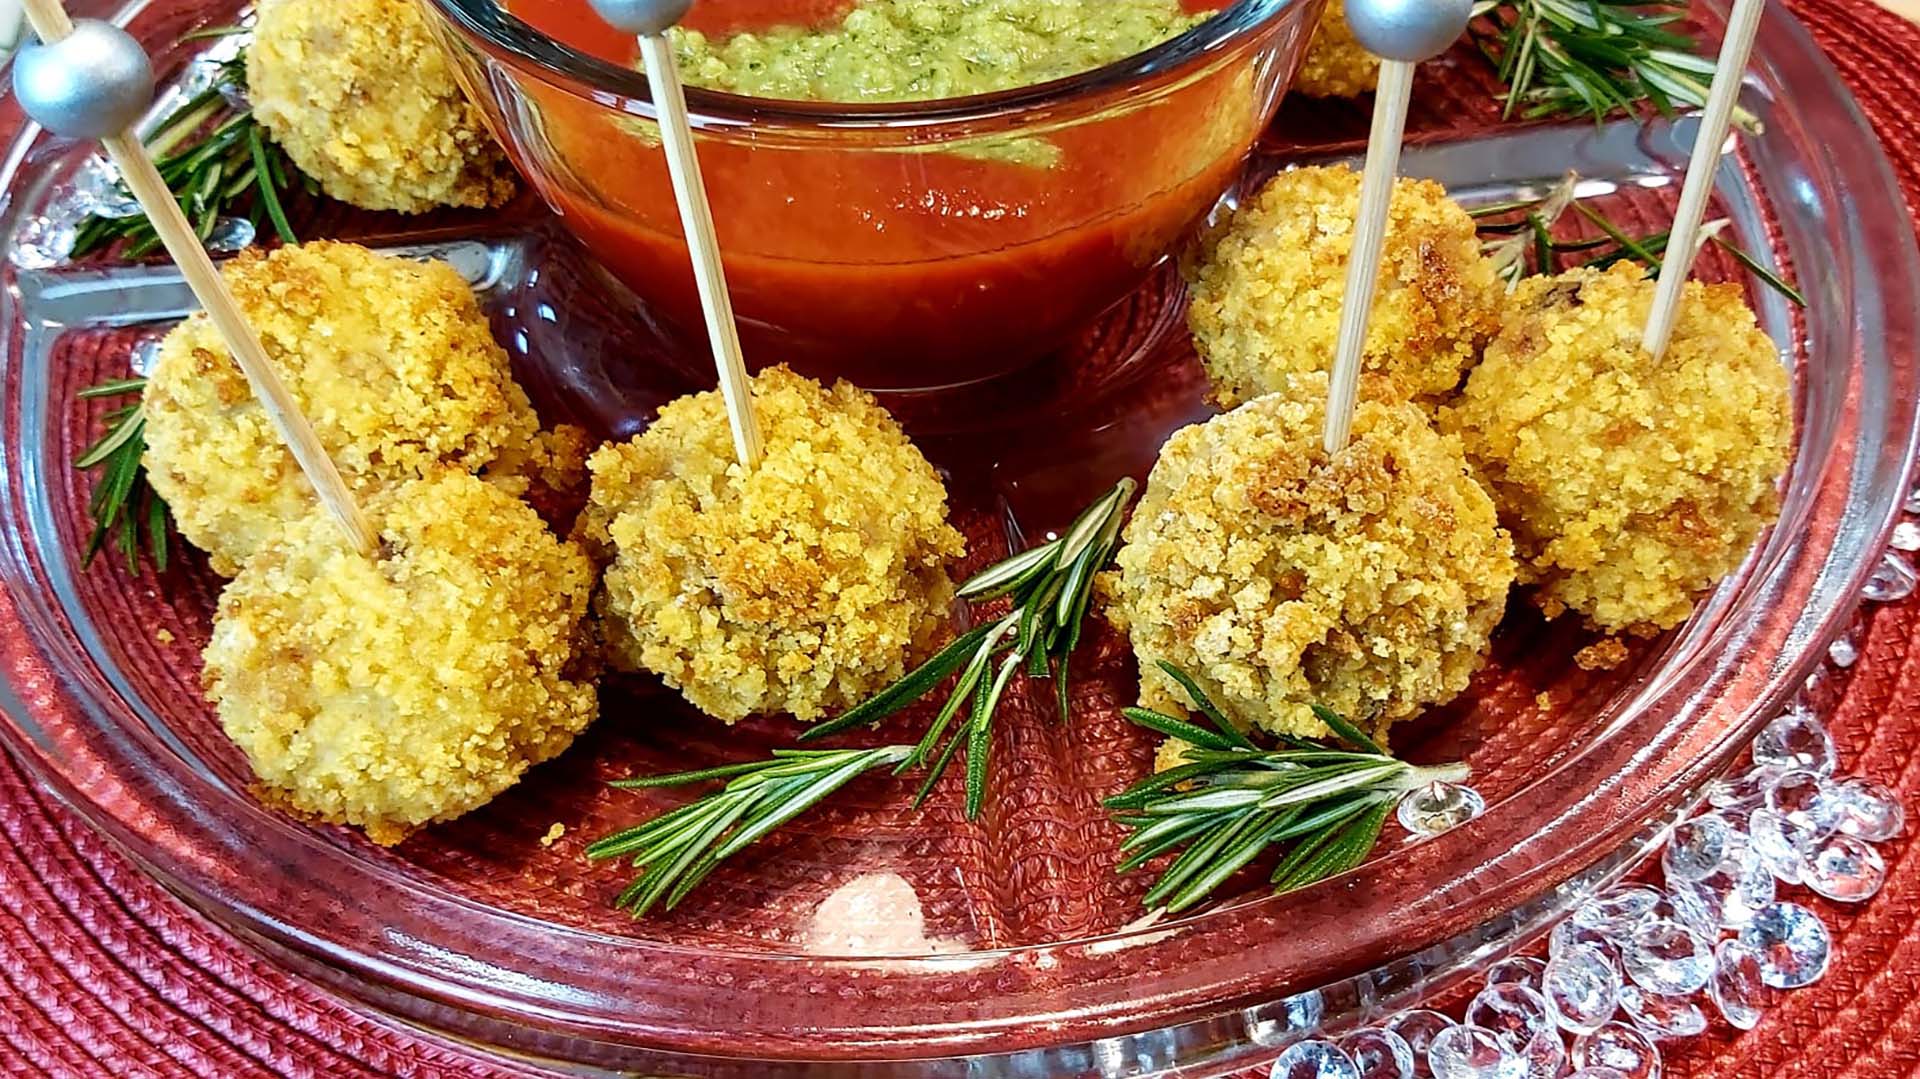 Veal-stuffed cornbread fritters in holiday cocktail sauce